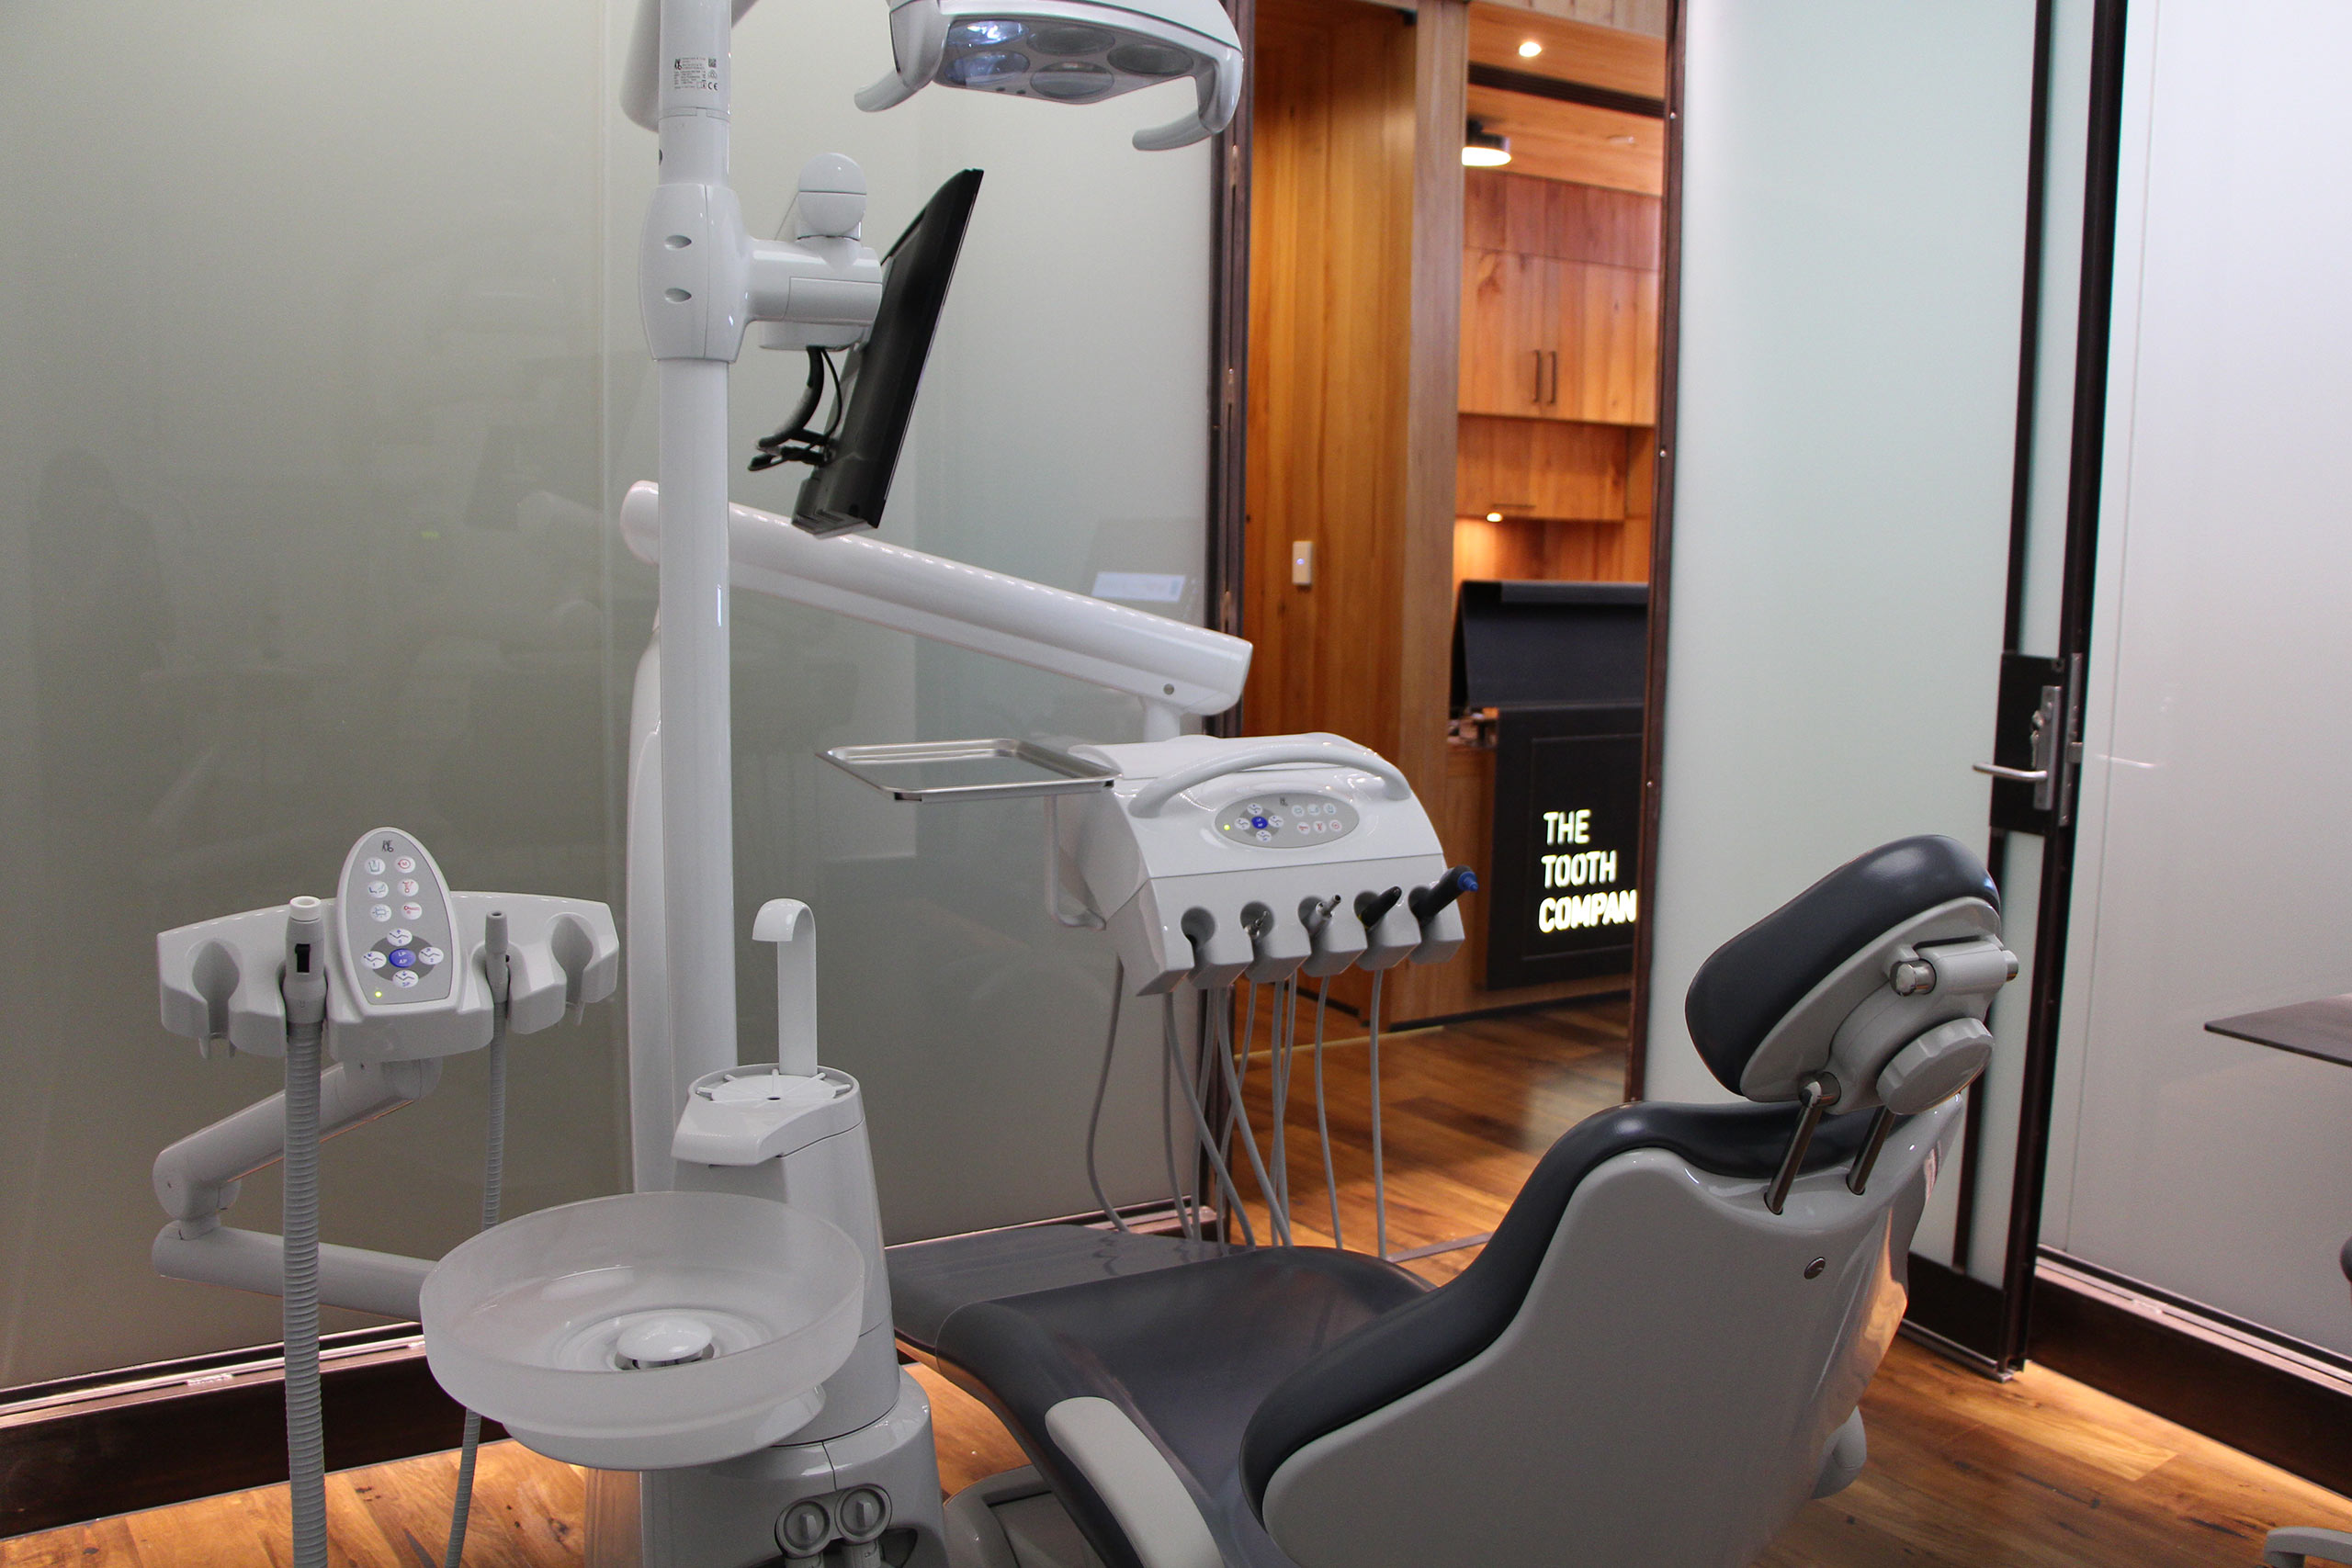 The Tooth Company Britomart dental practice